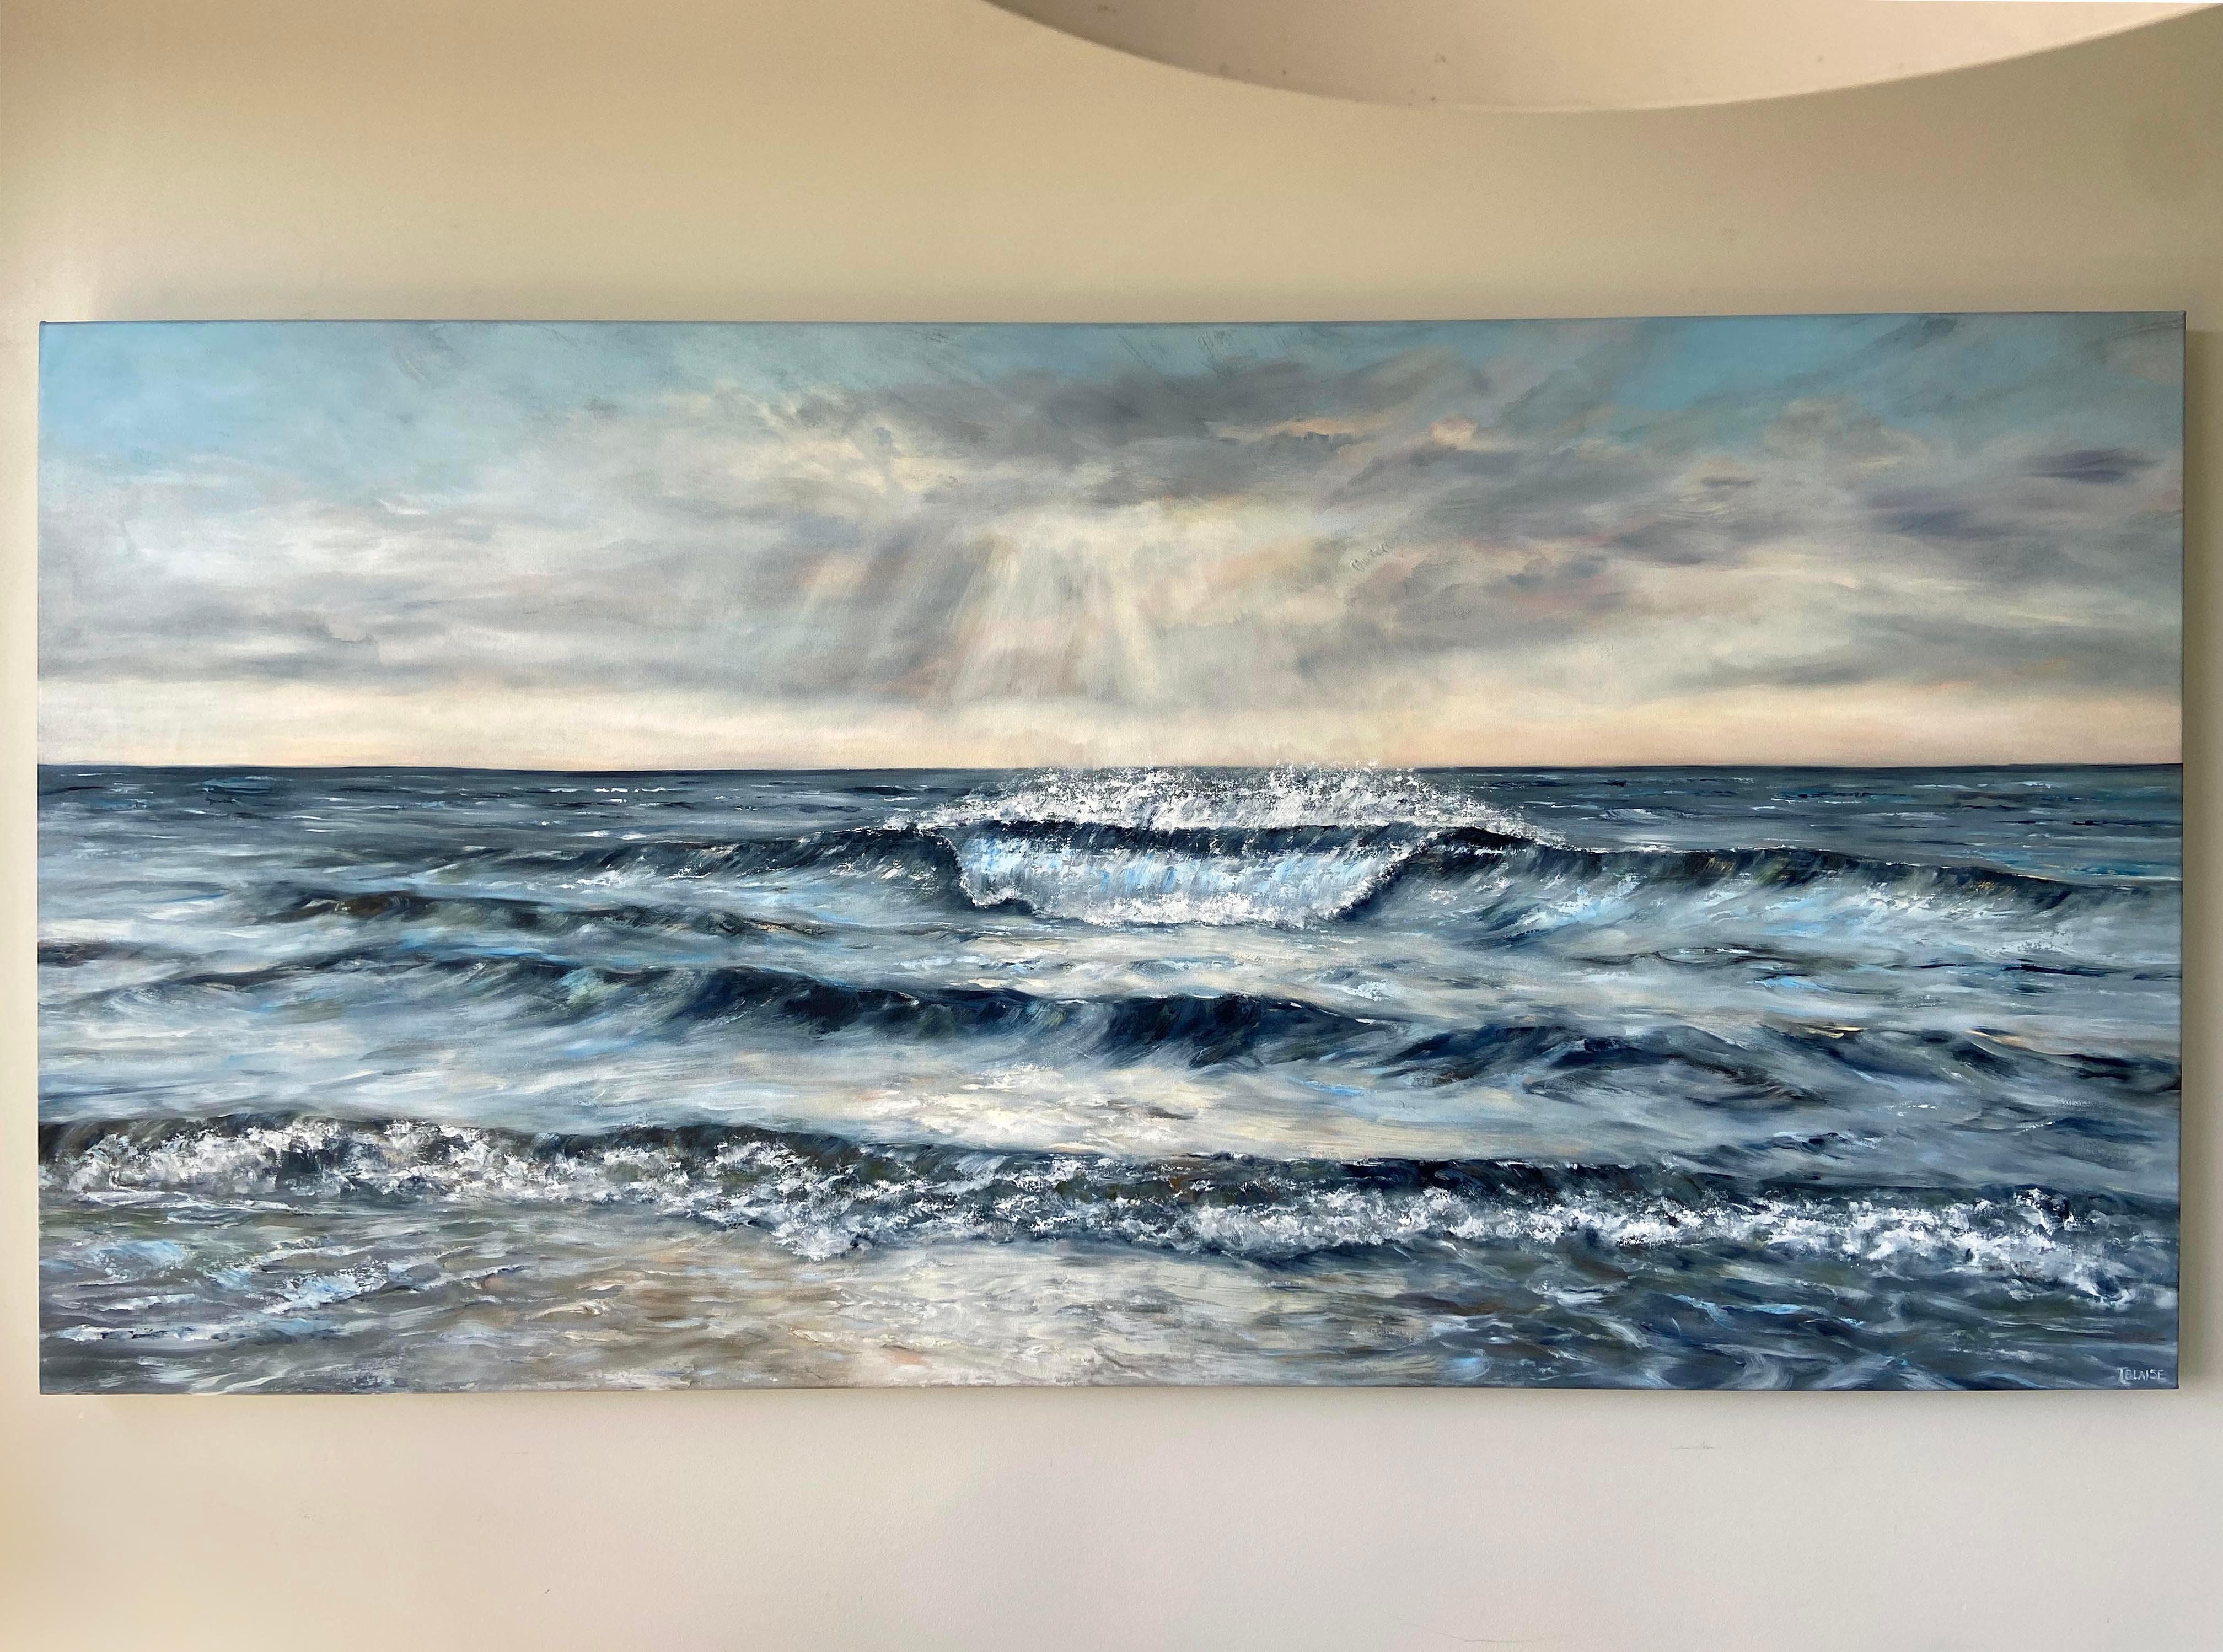 <p>Artist Comments<br>The artwork captures the serenity of the ocean. Painted with oil paint and cold wax, the waves carry a slightly raised texture, adding to the realistic quality of the scene. The composition celebrates the majesty of the color